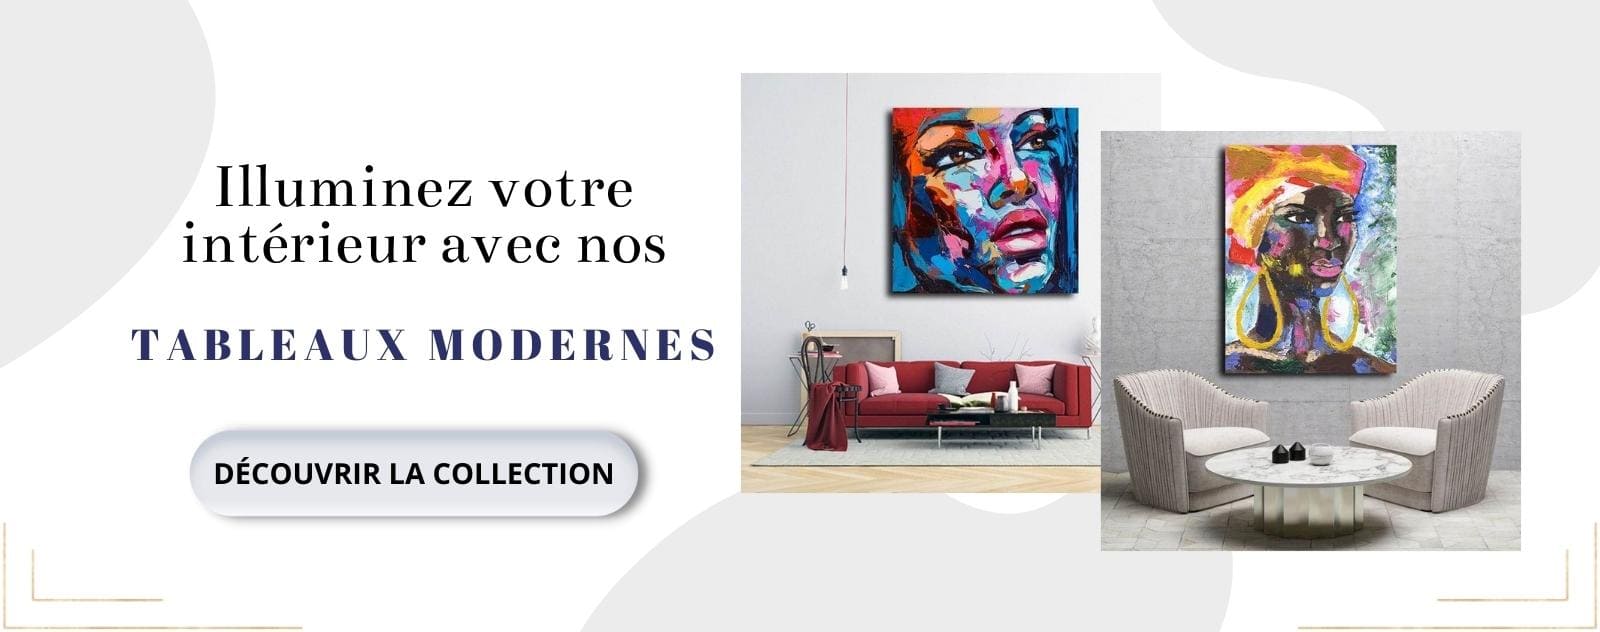 Tableau Moderne Collection